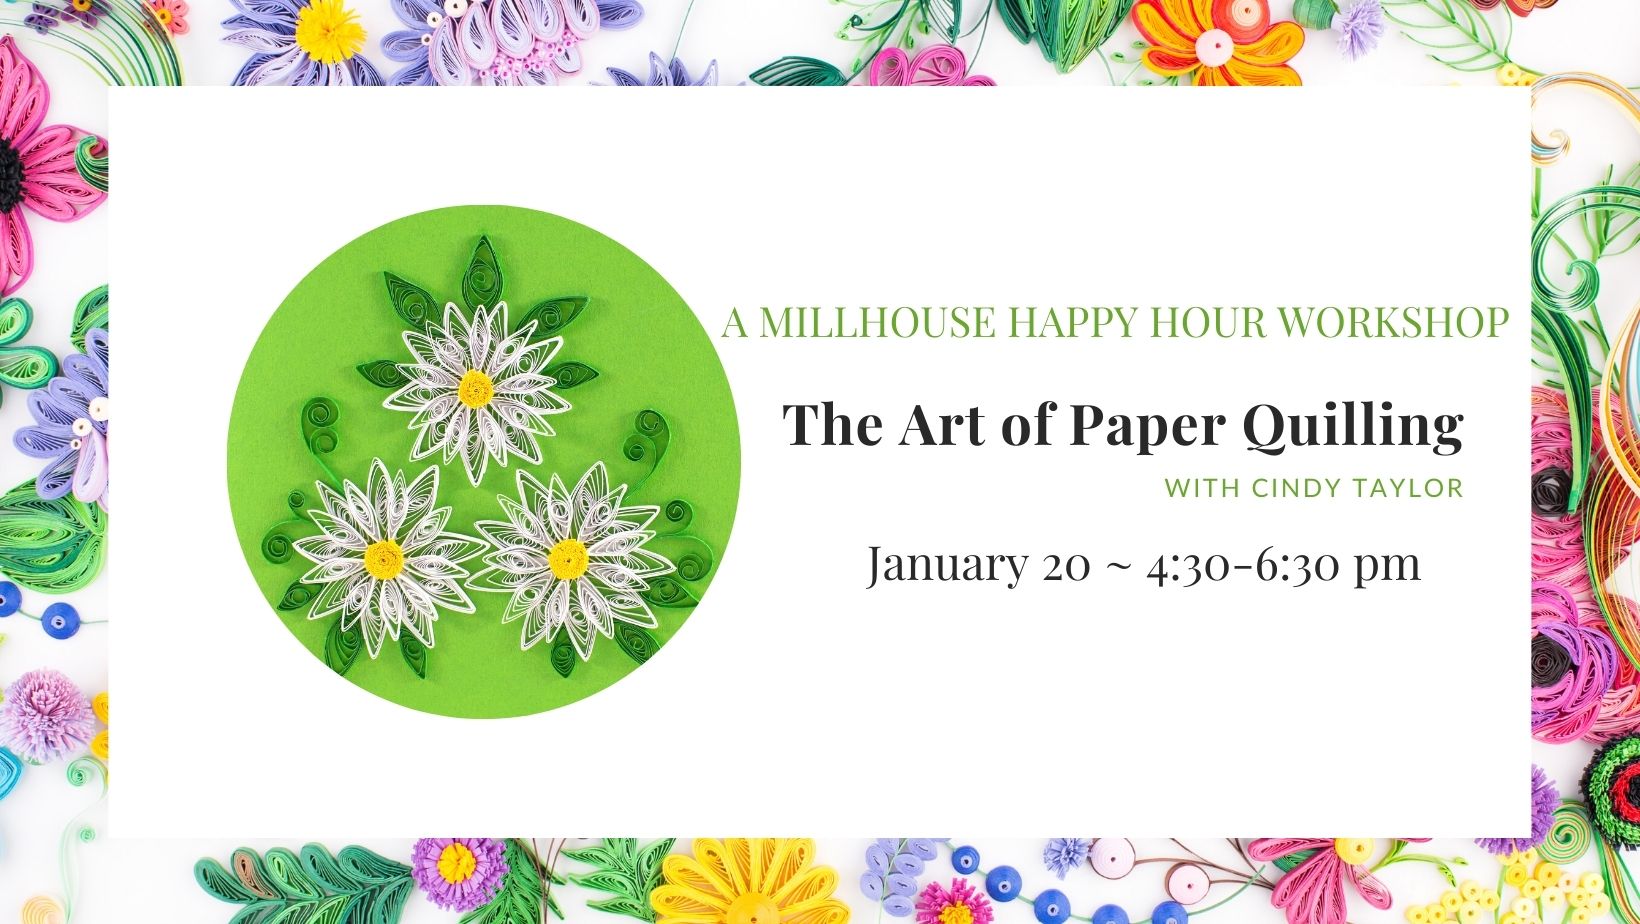 The Art of Quilling - A MillHouse Happy Hour Workshop with Cindy Taylor